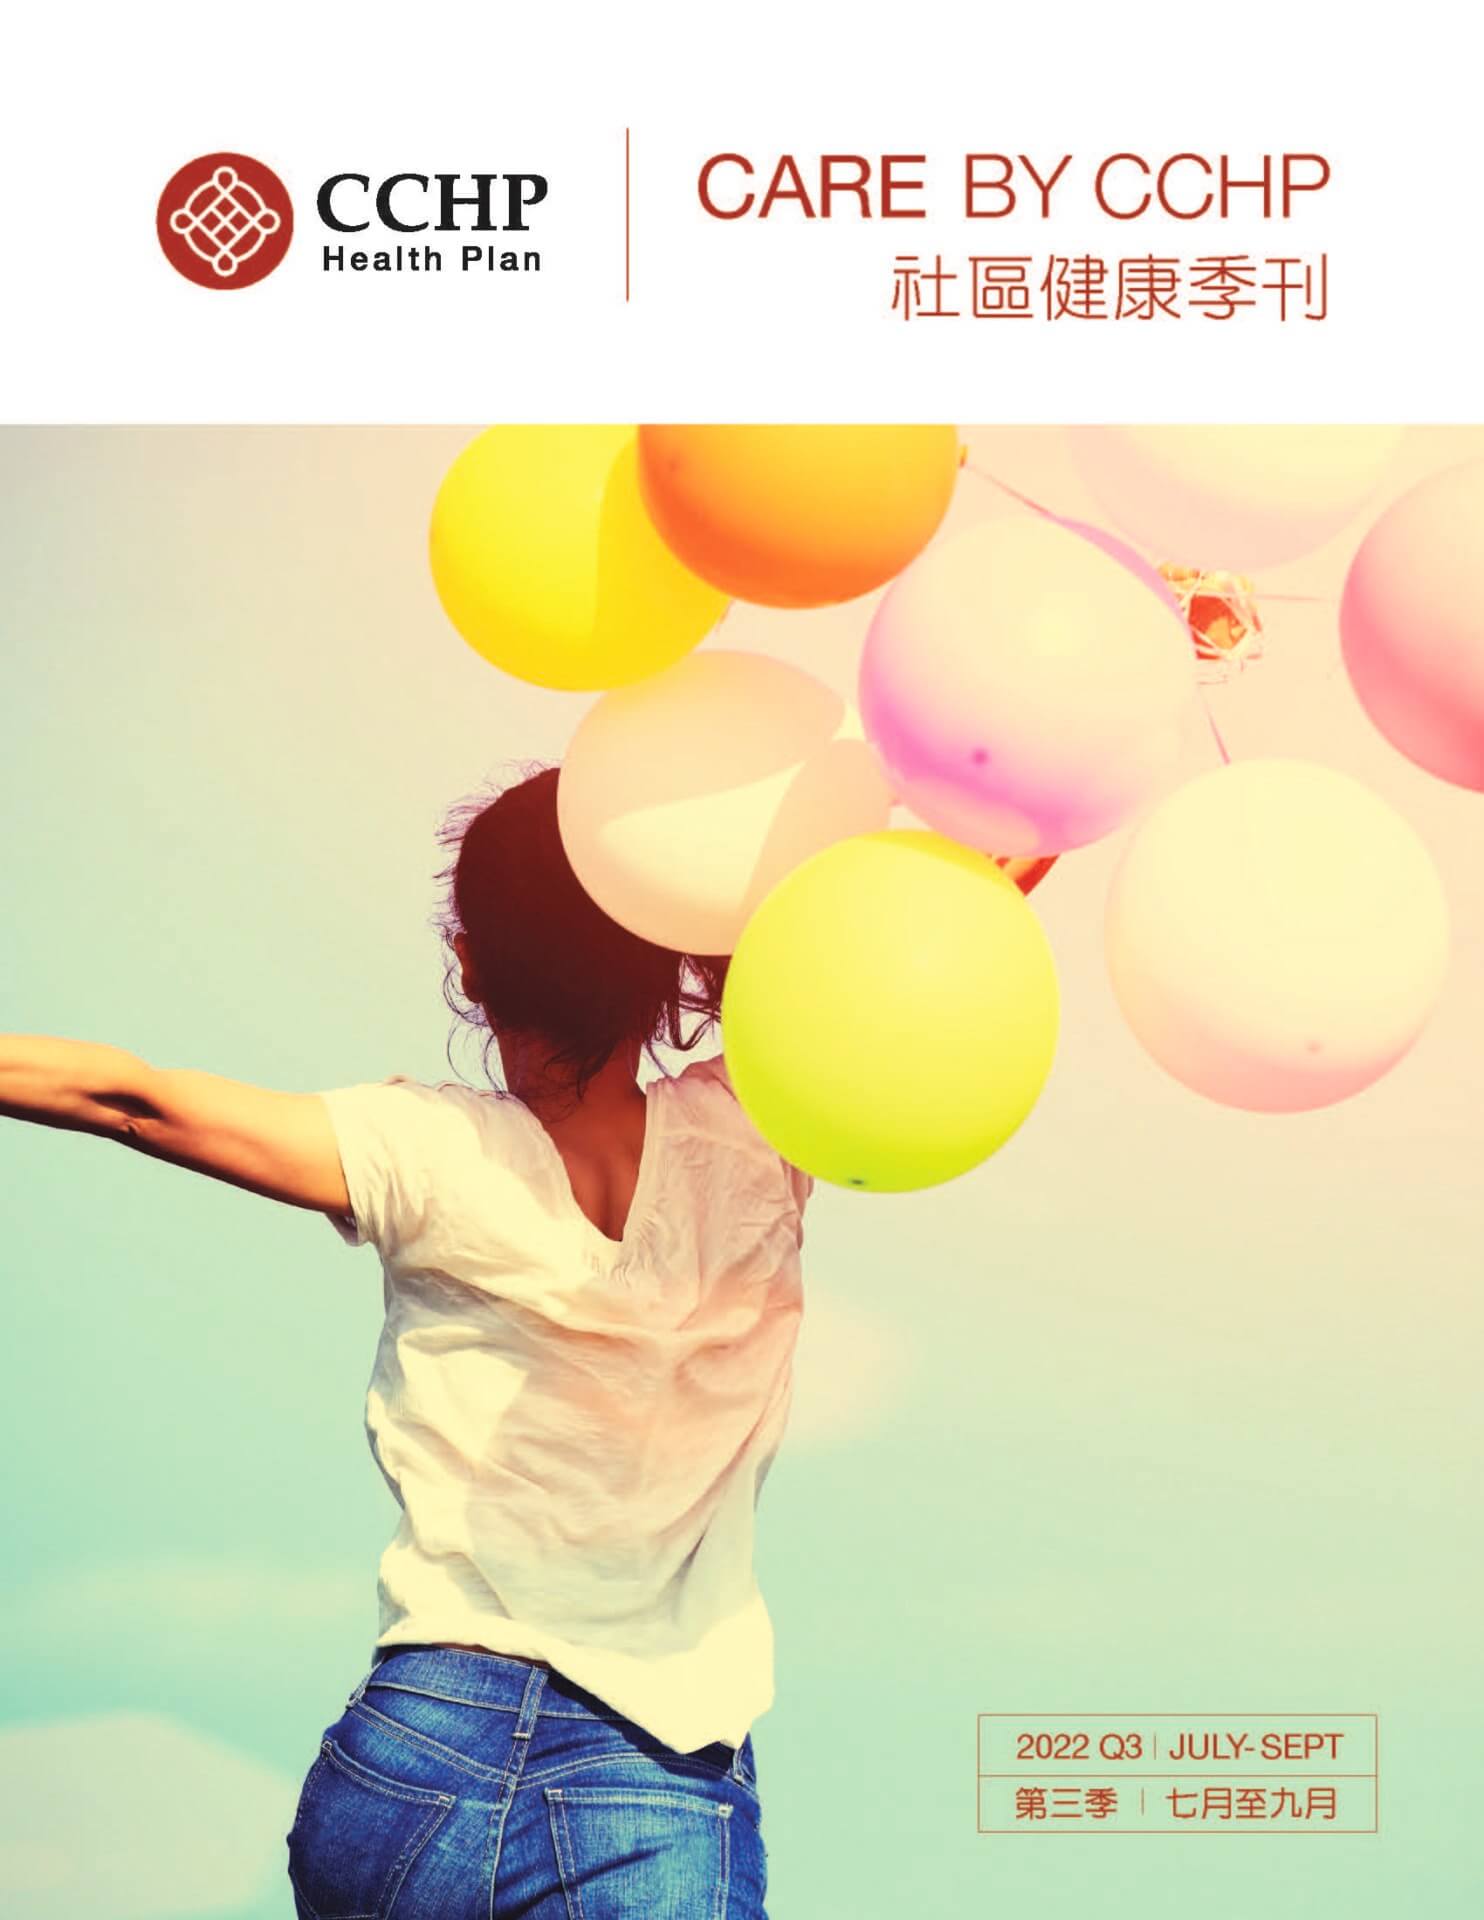 cchp q3 newsletter a lady holding balloons jumping